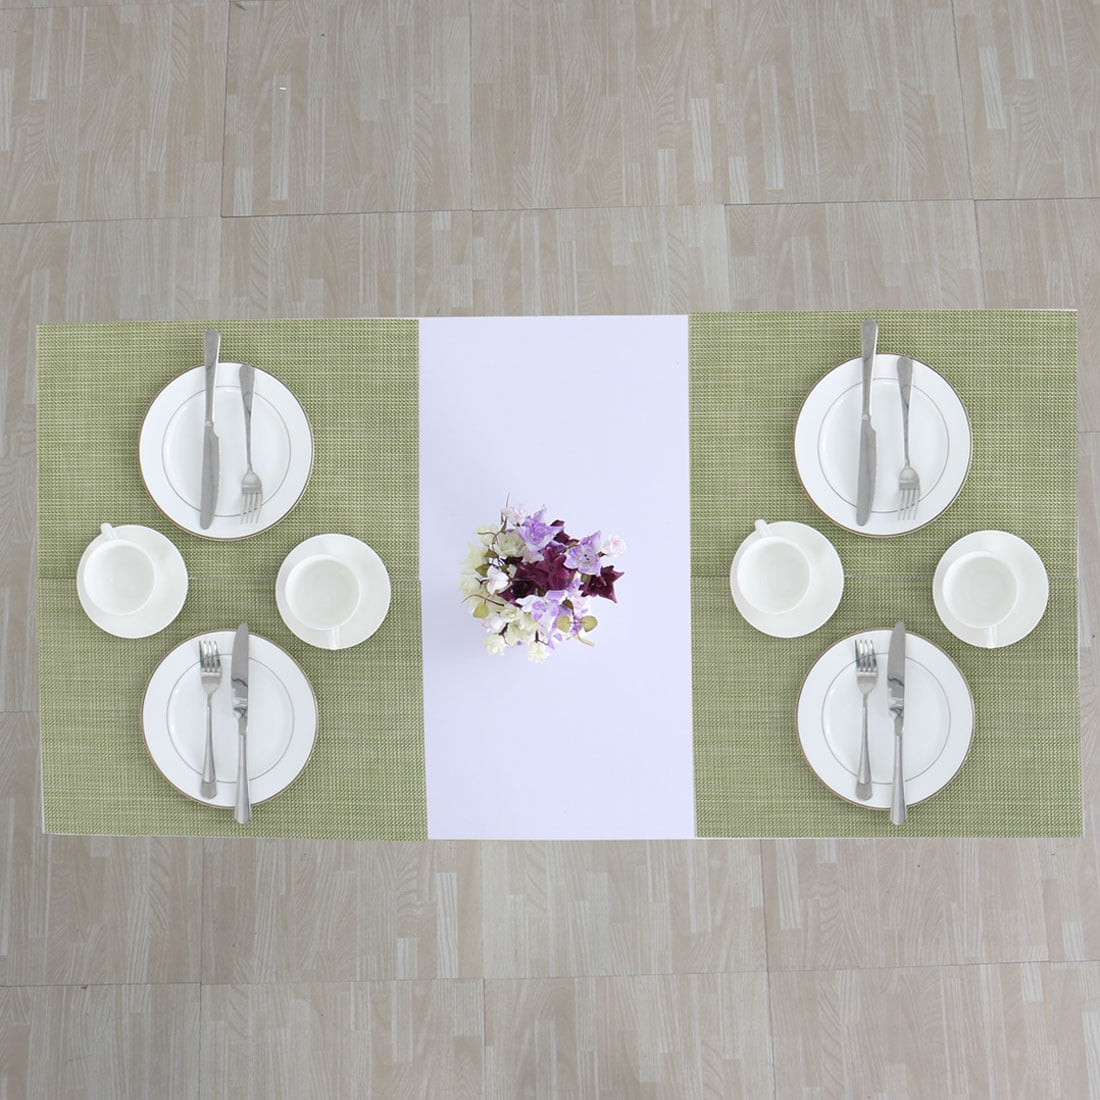 Grey Fontic 30x45cm Set of 6 Washable Table Place Mats Table Mats PVC Placemats Non-Slip and Environmental Protection Dining Mats 